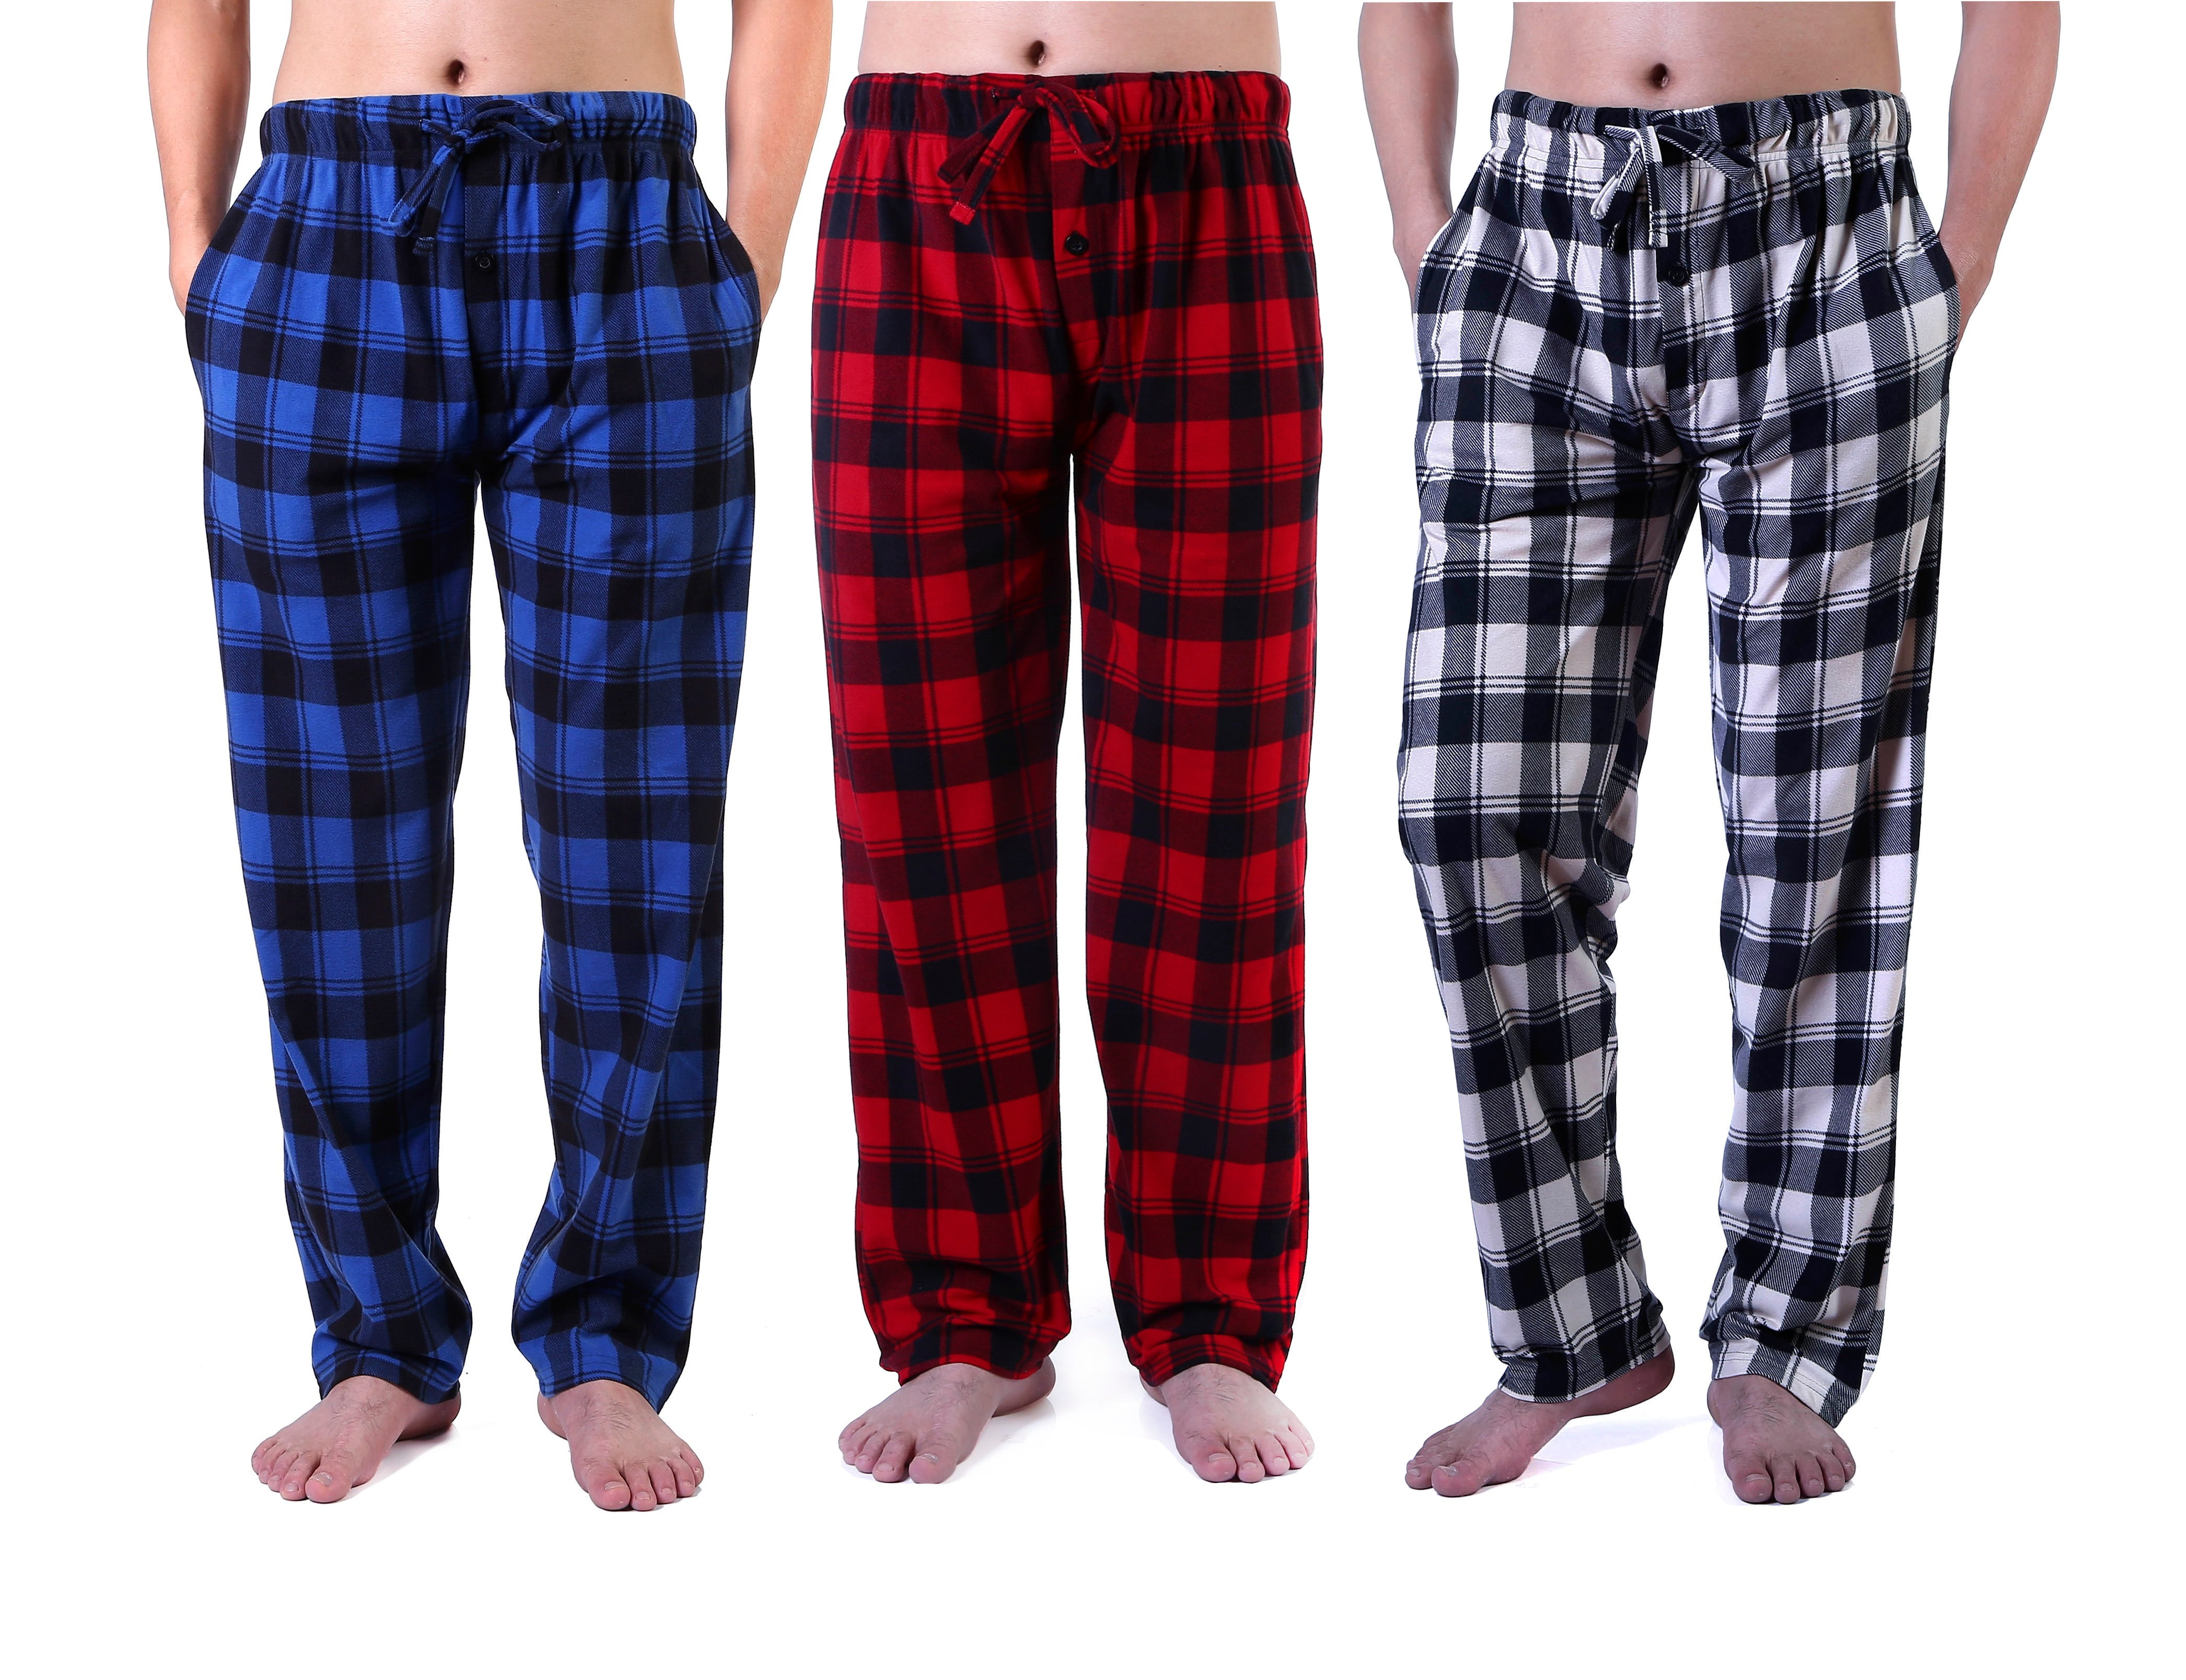 Different Touch - Different Touch Men's 3 pack Big & Tall Sleep Pants ...